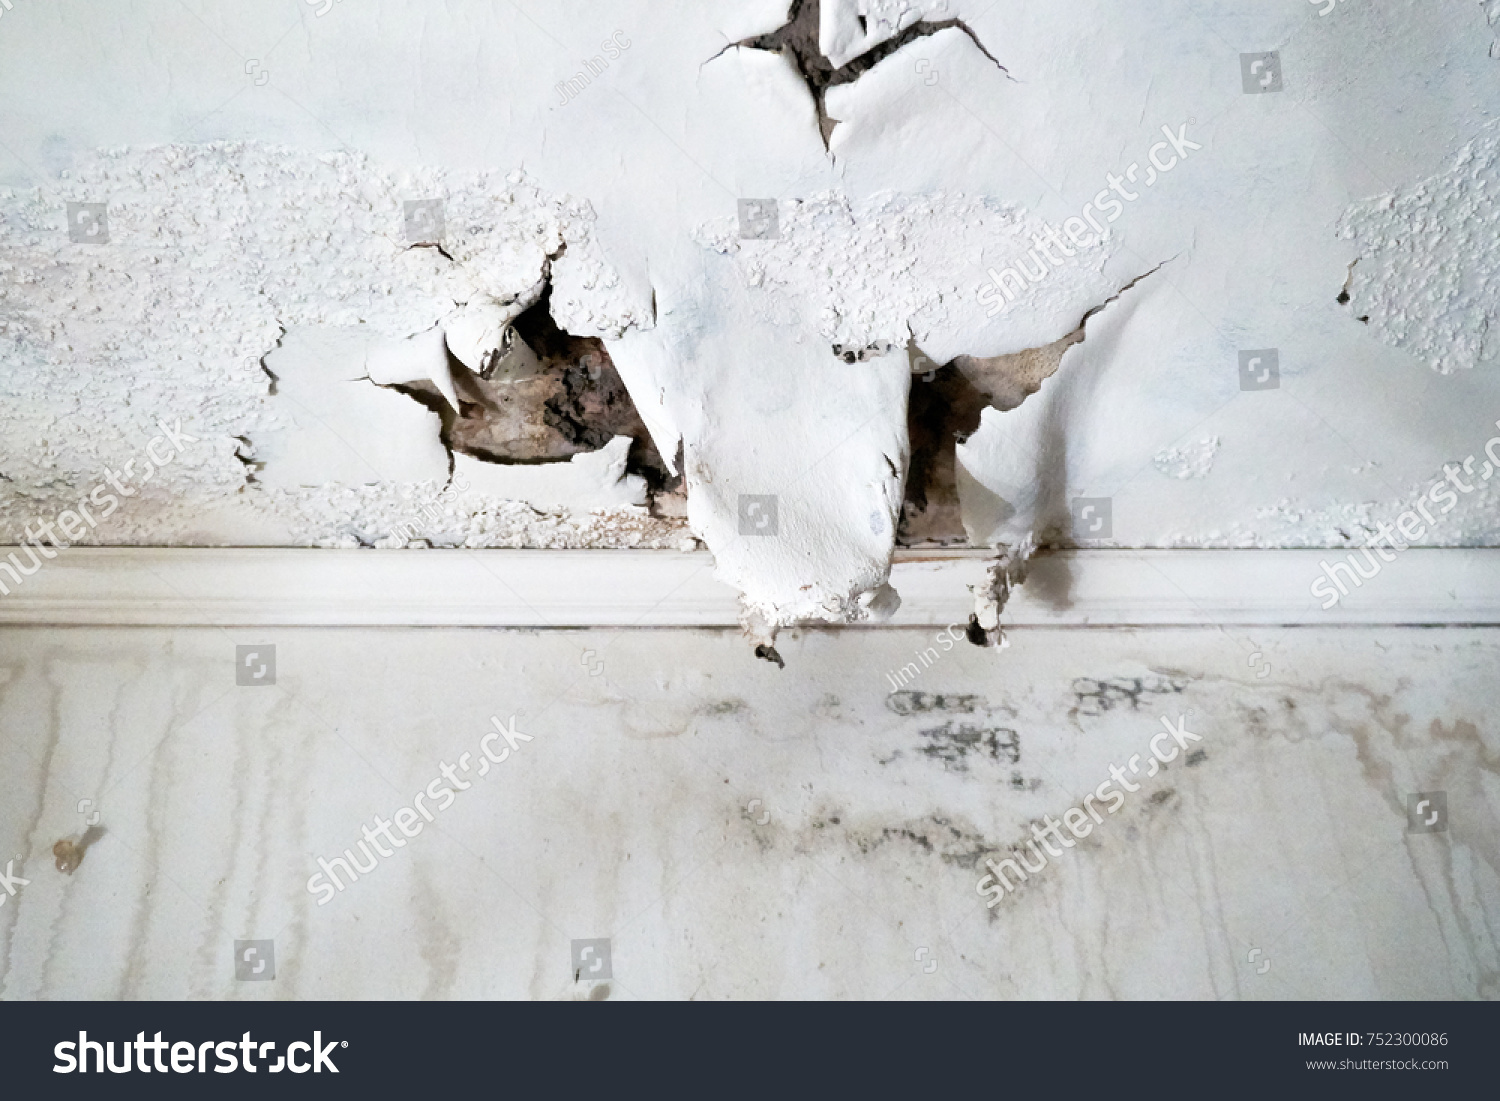 Ceiling and wall with rain damage due to violent weather and roof damage                                #752300086